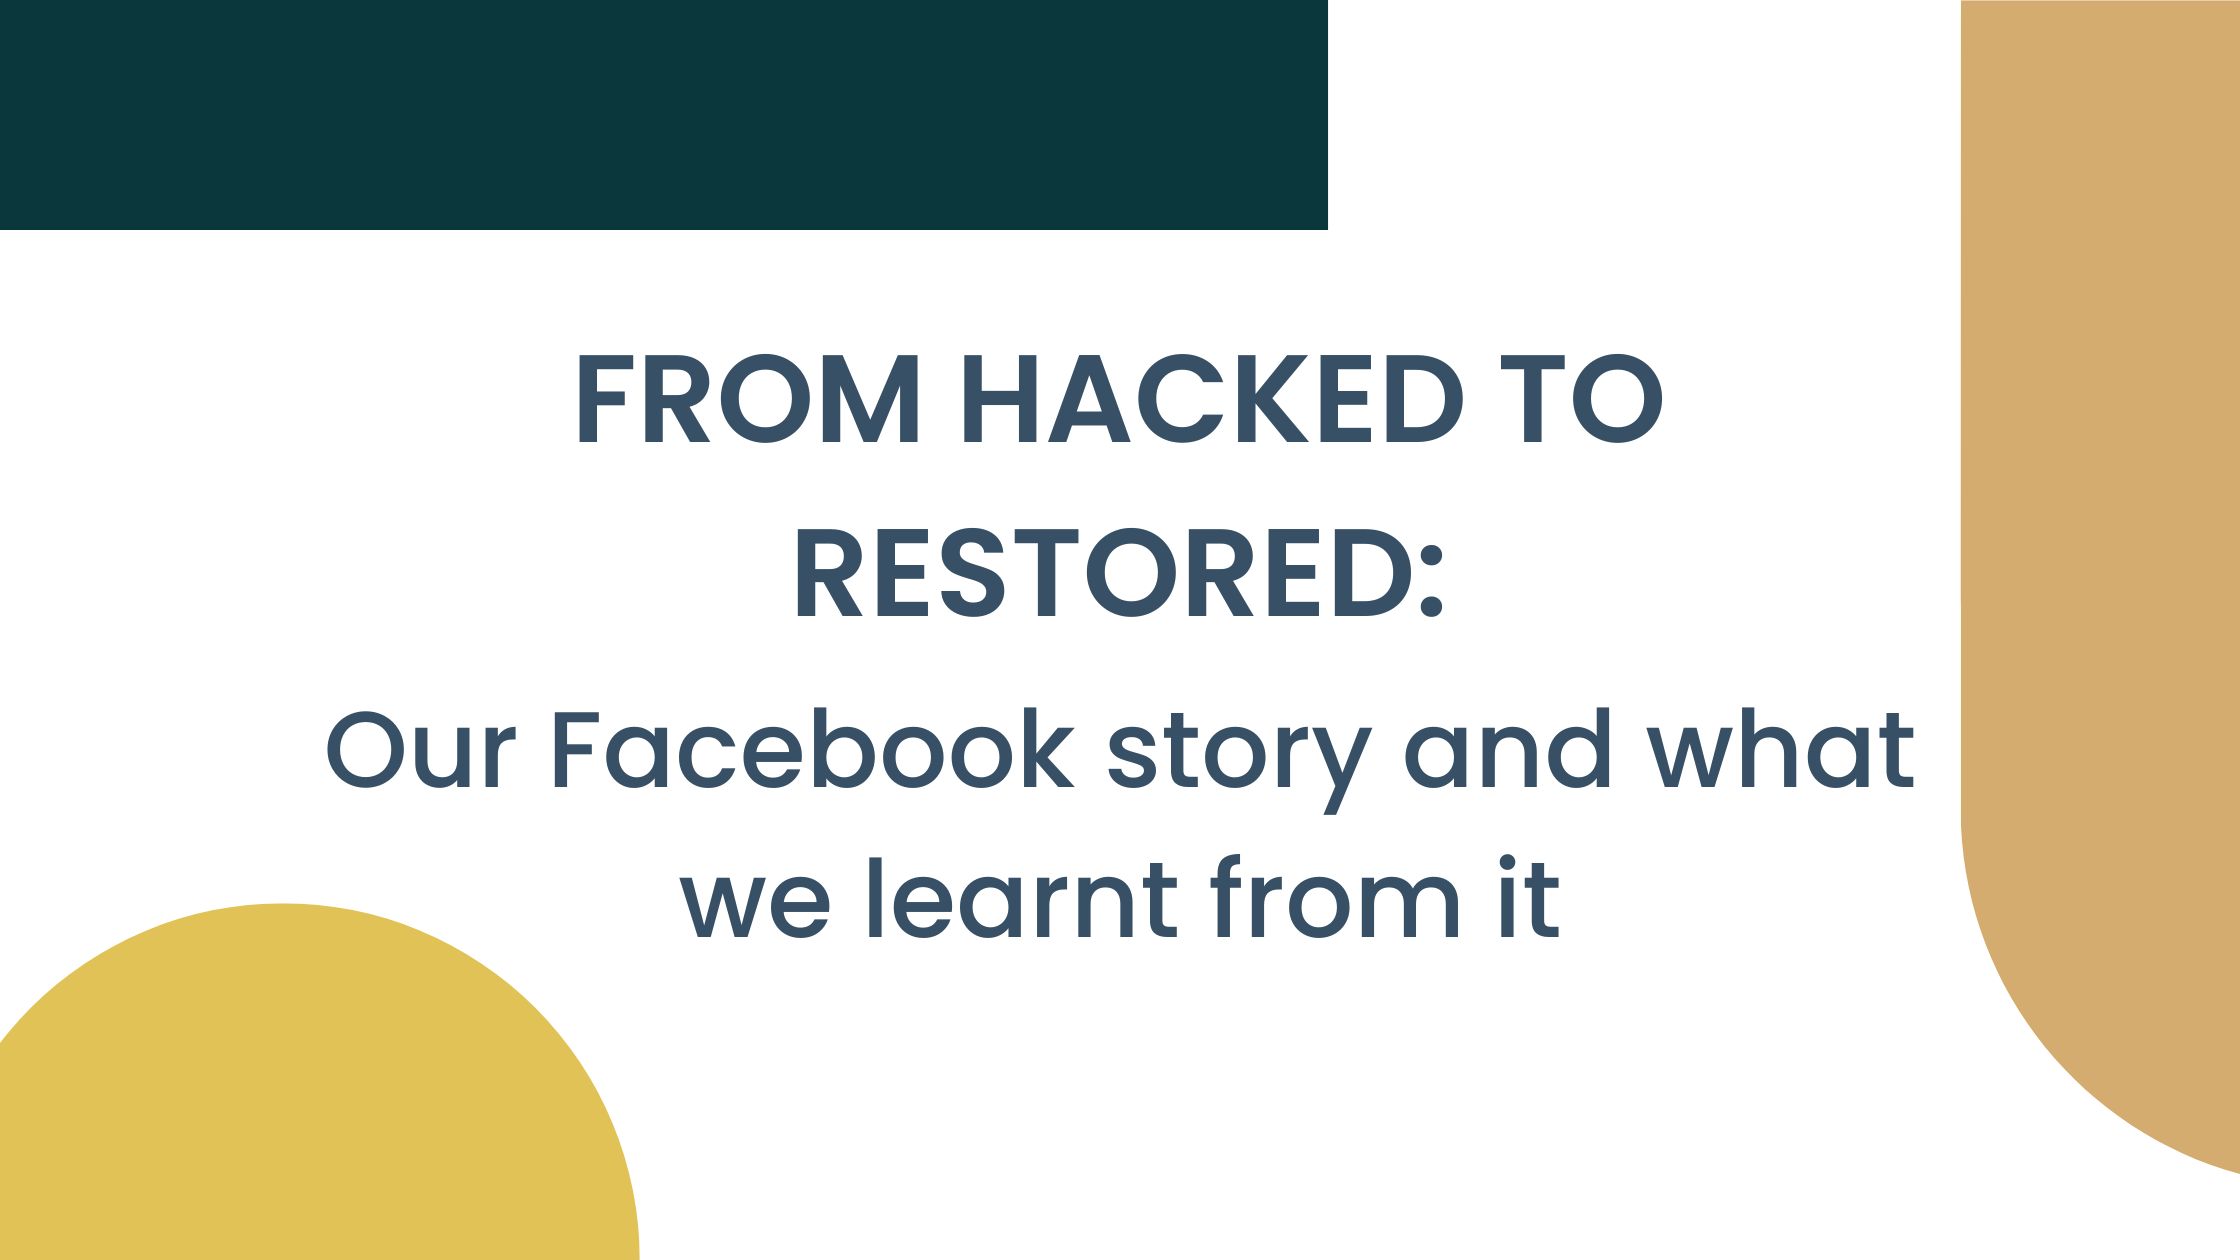 From hacked to restored: Our Facebook story and what we learnt from it